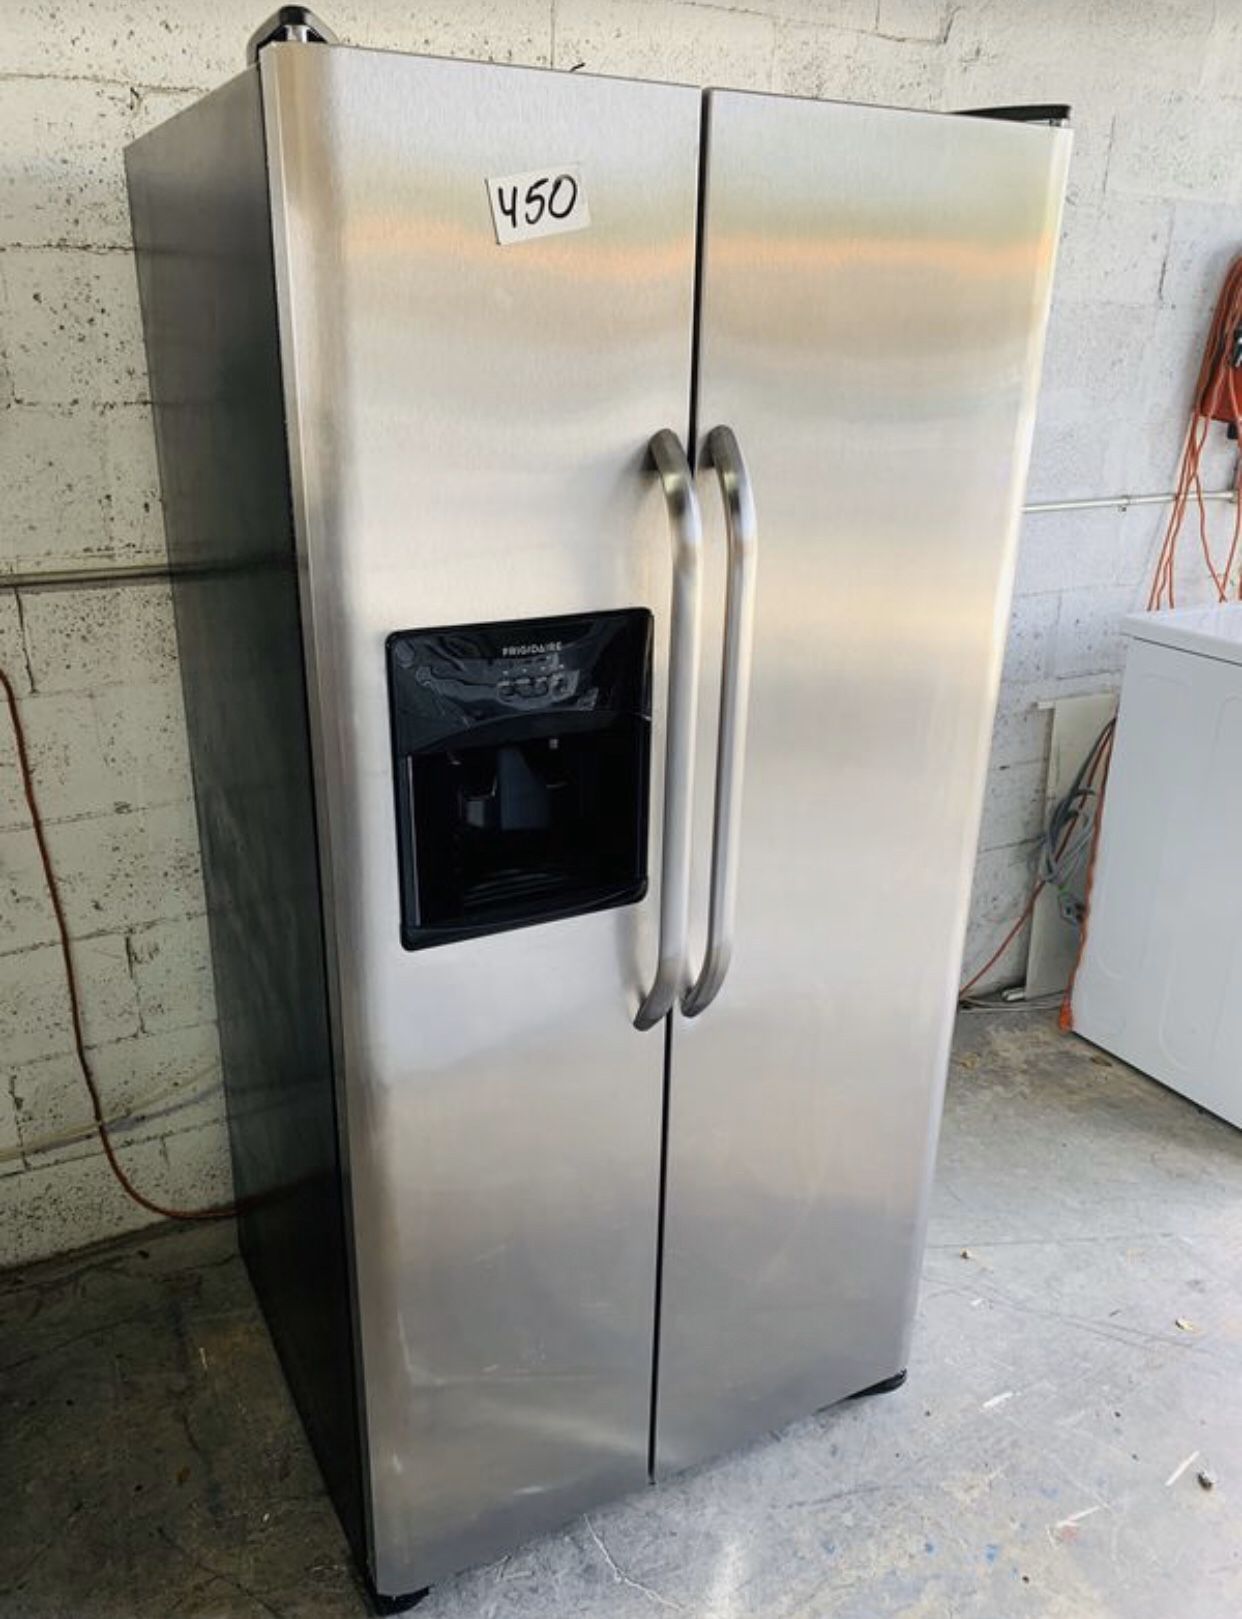 Frigidaire stainless steel refrigerator 33” wide in perfect condition and 6 months warranty. We have delivery service available